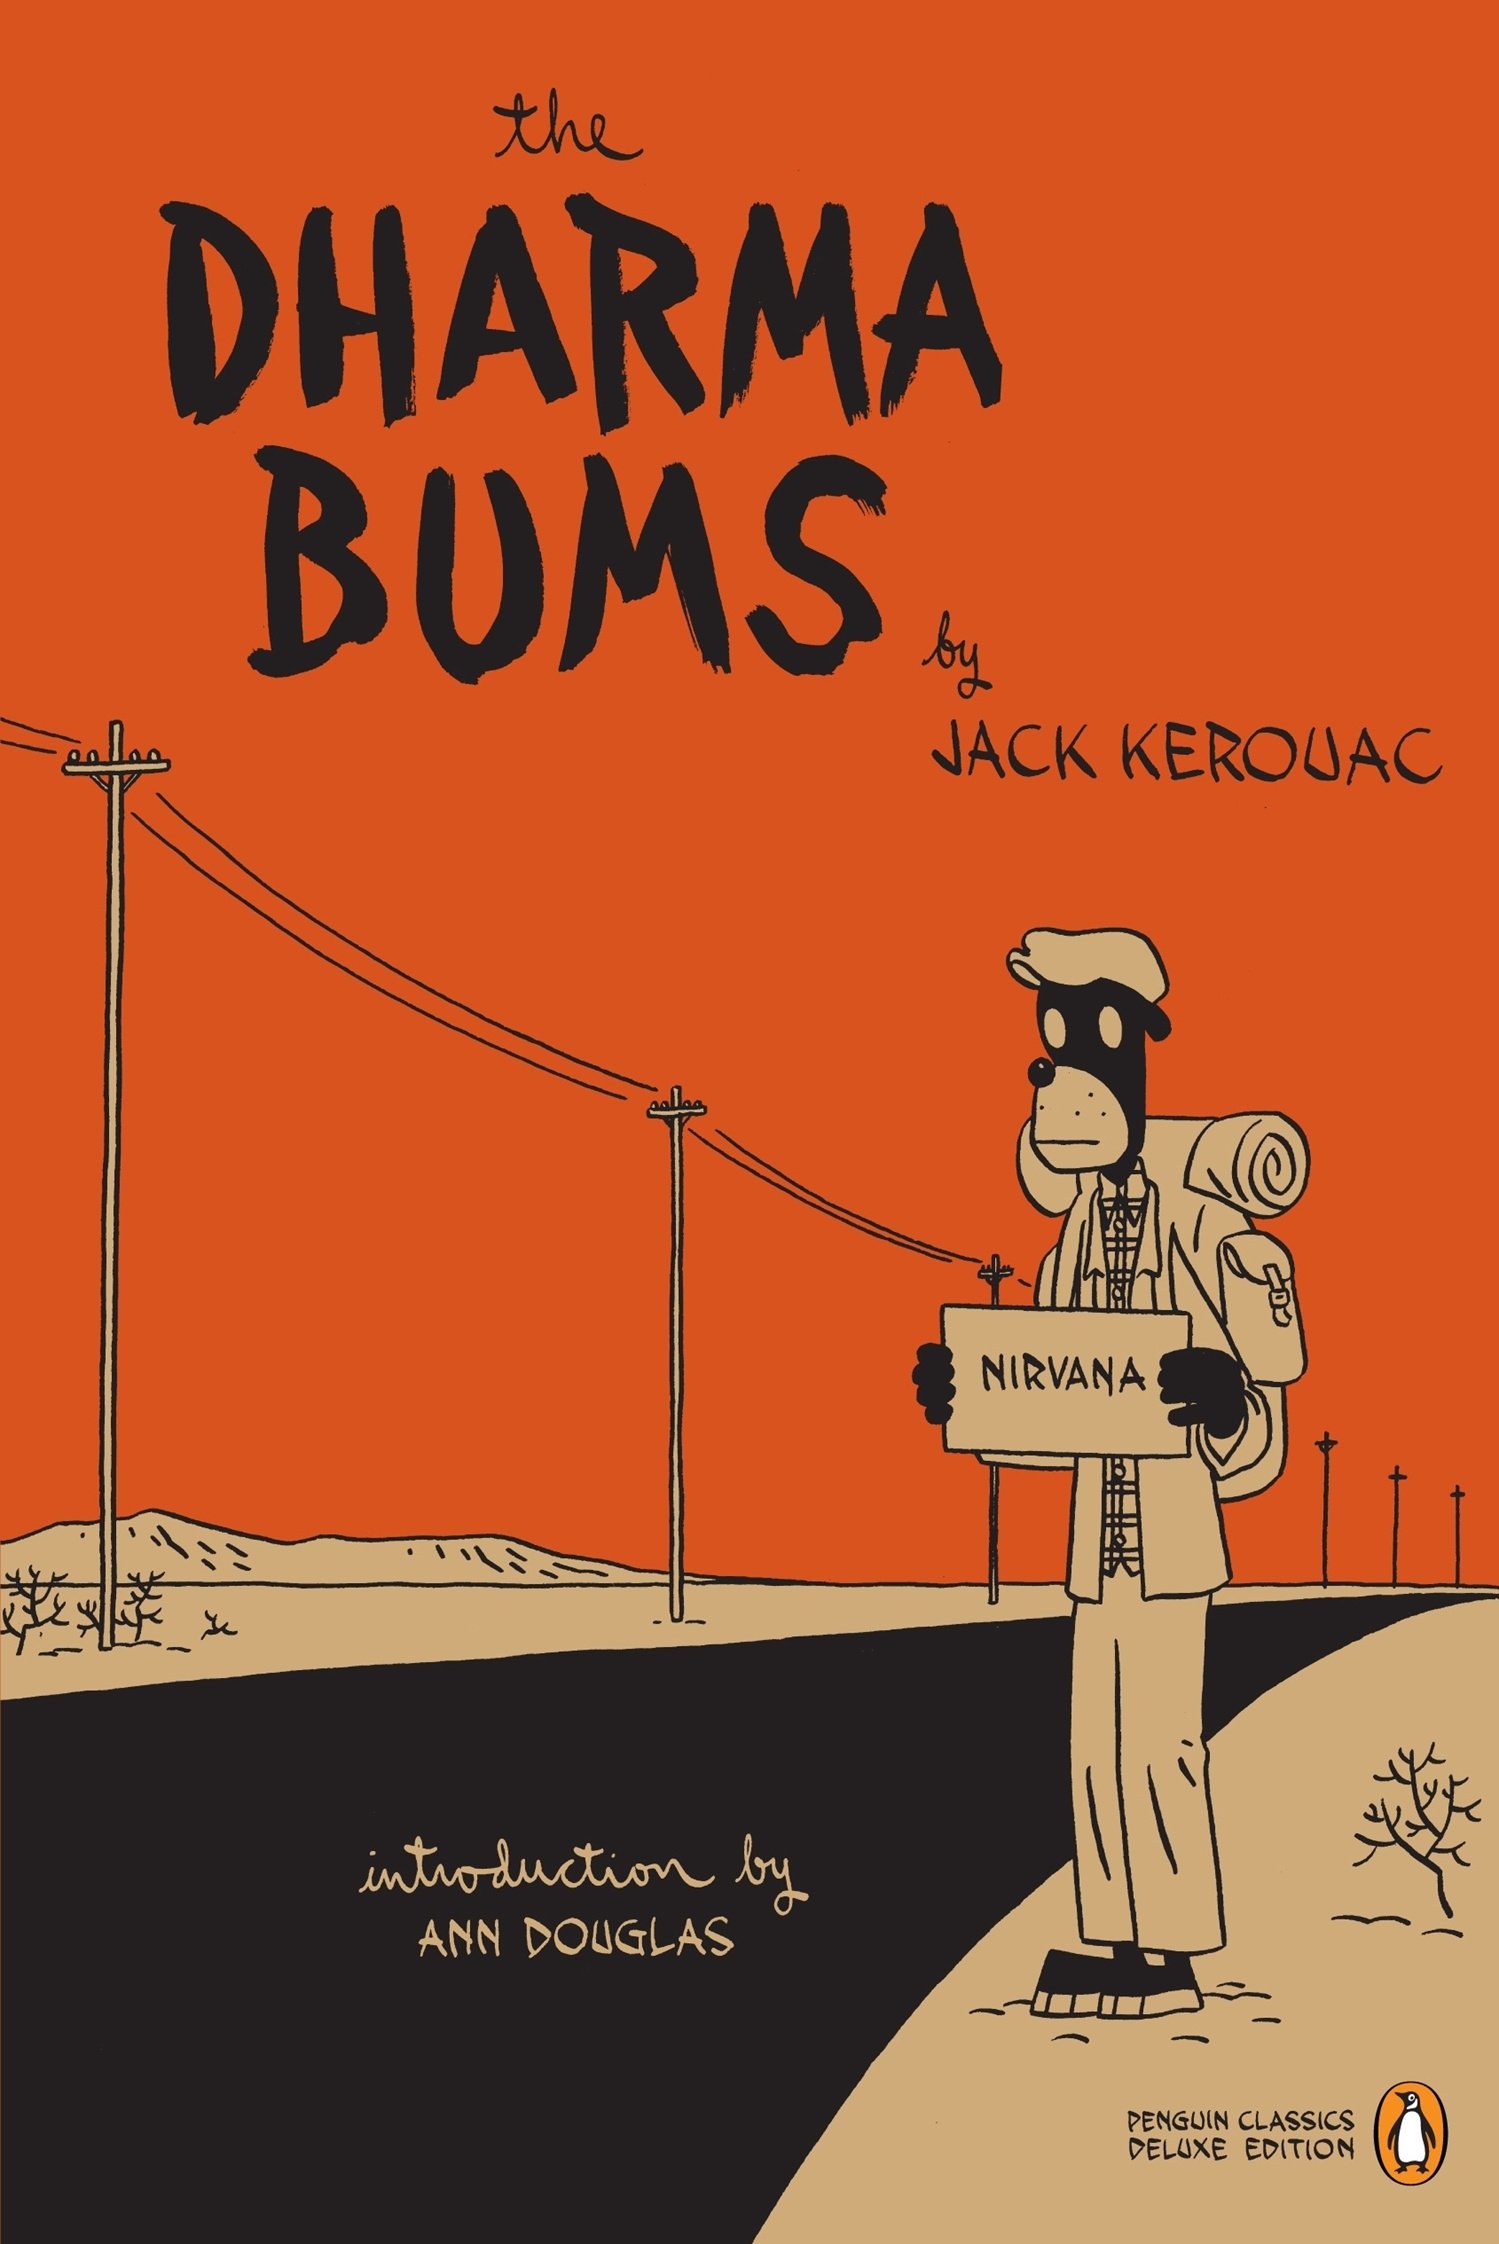 Image of  The Dharma Bums Cover